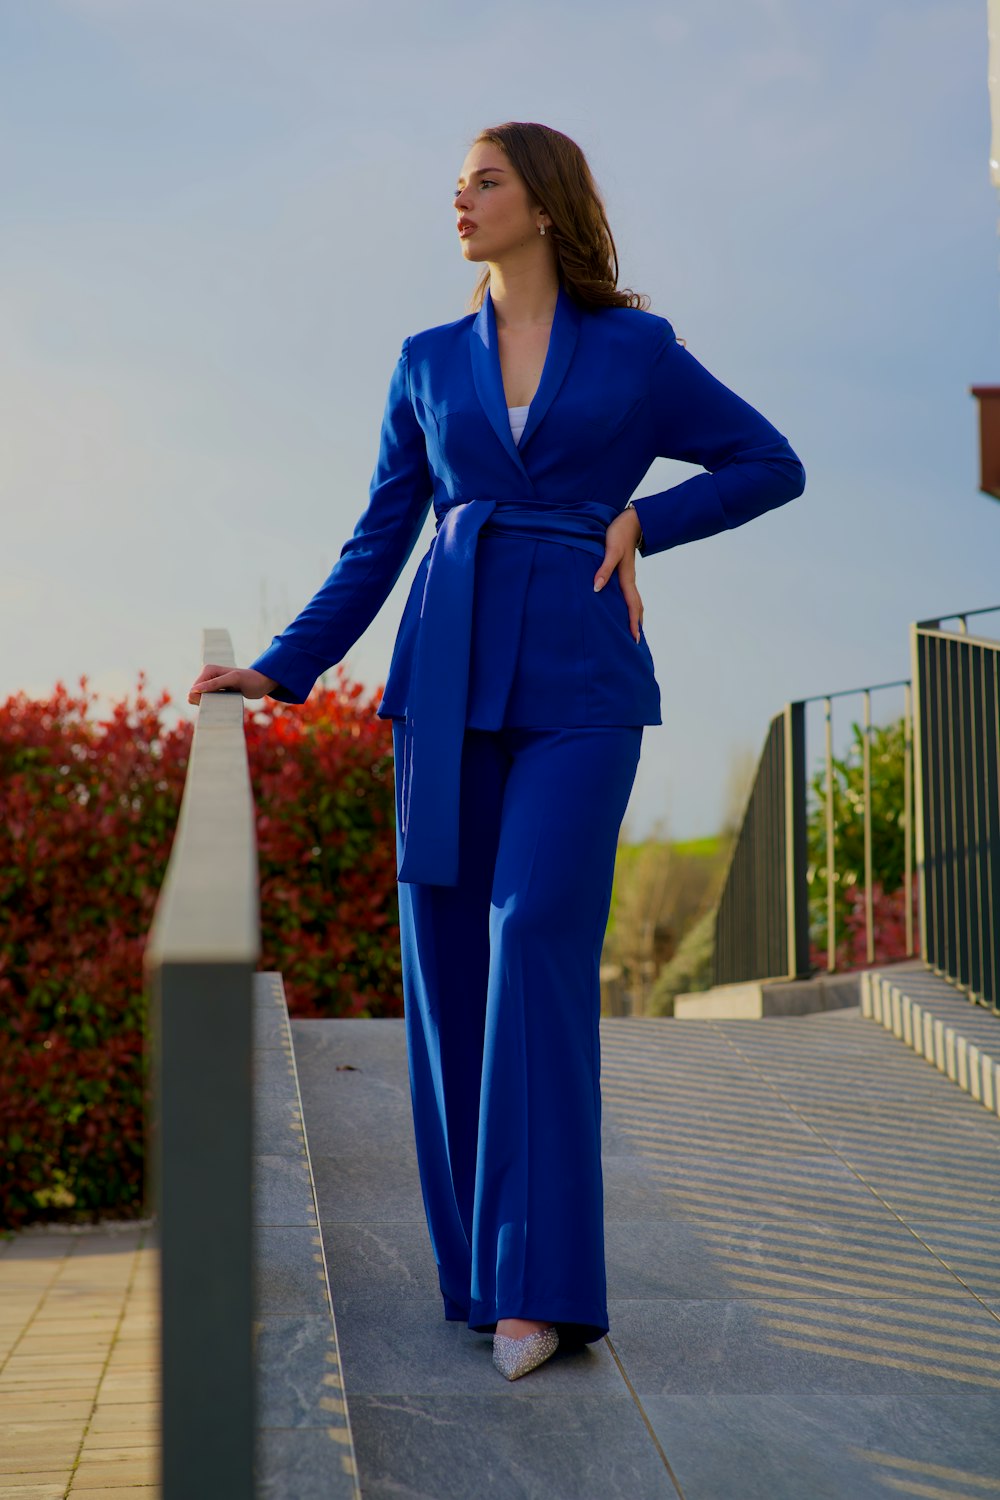 a woman in a blue suit standing on a ledge